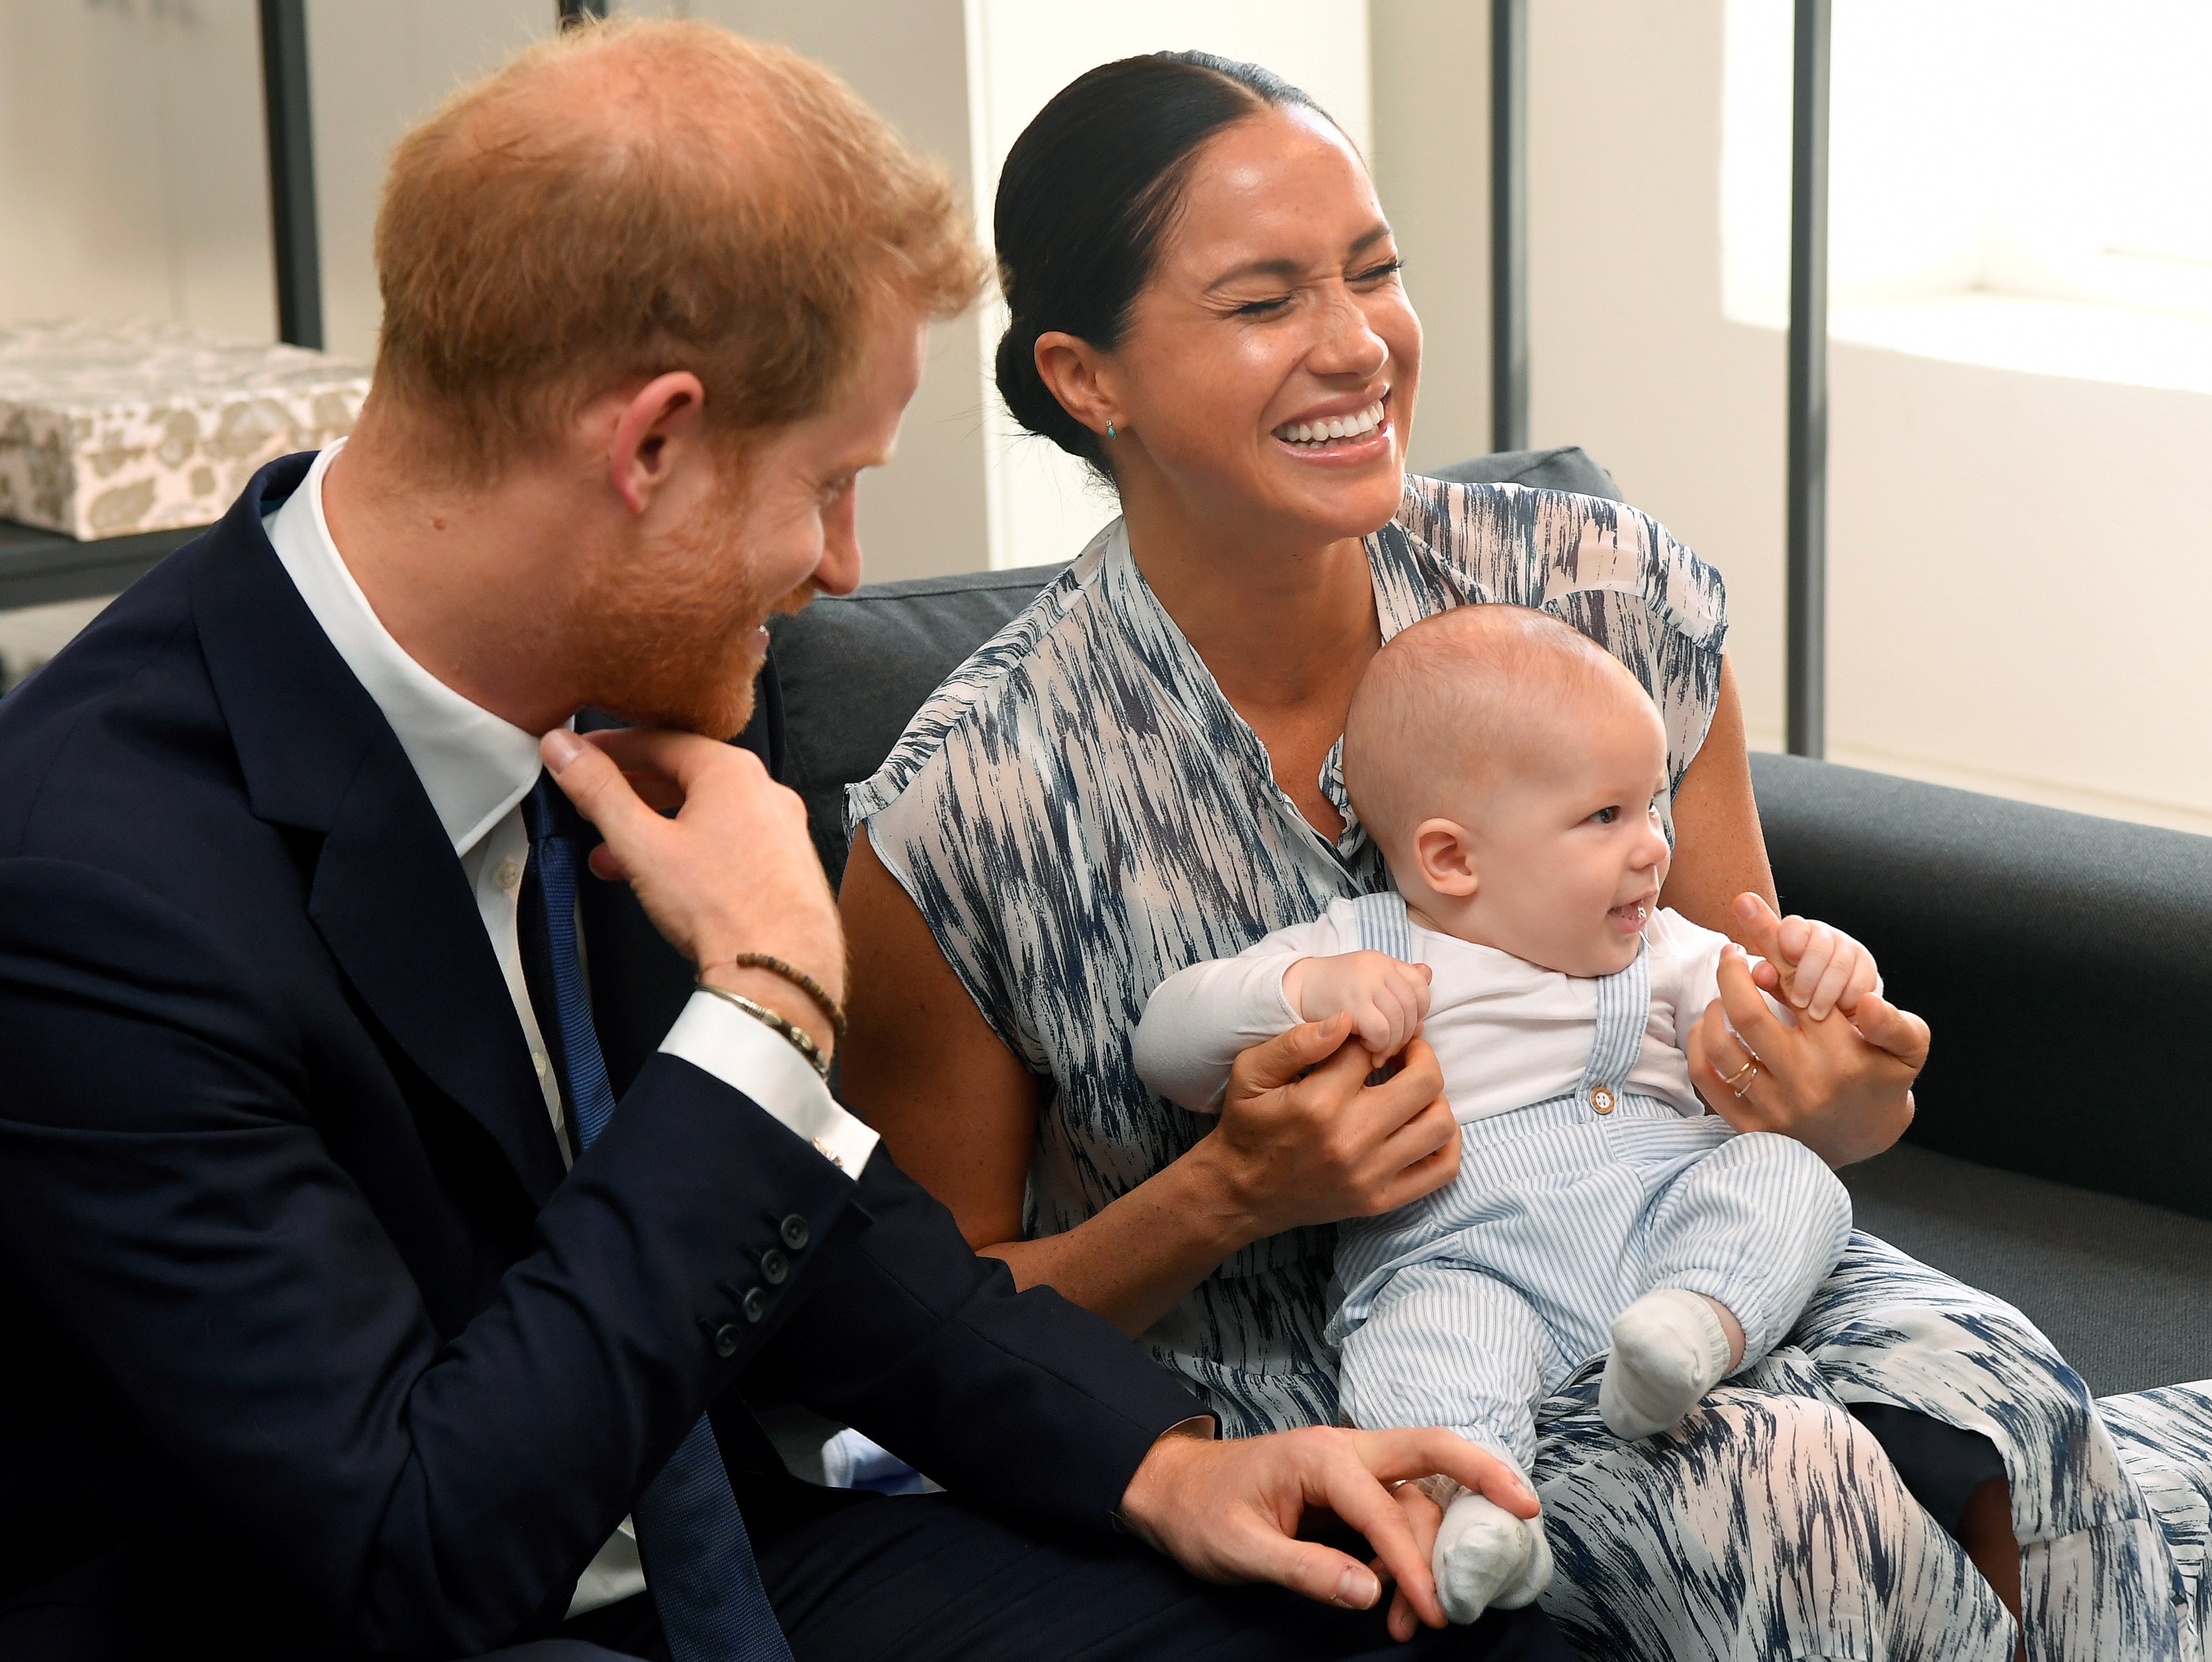 Harry and Meghan pictured with son Archie who Harry says is the focus of his life alongside daughter Lilibet. Toby Melville/PA